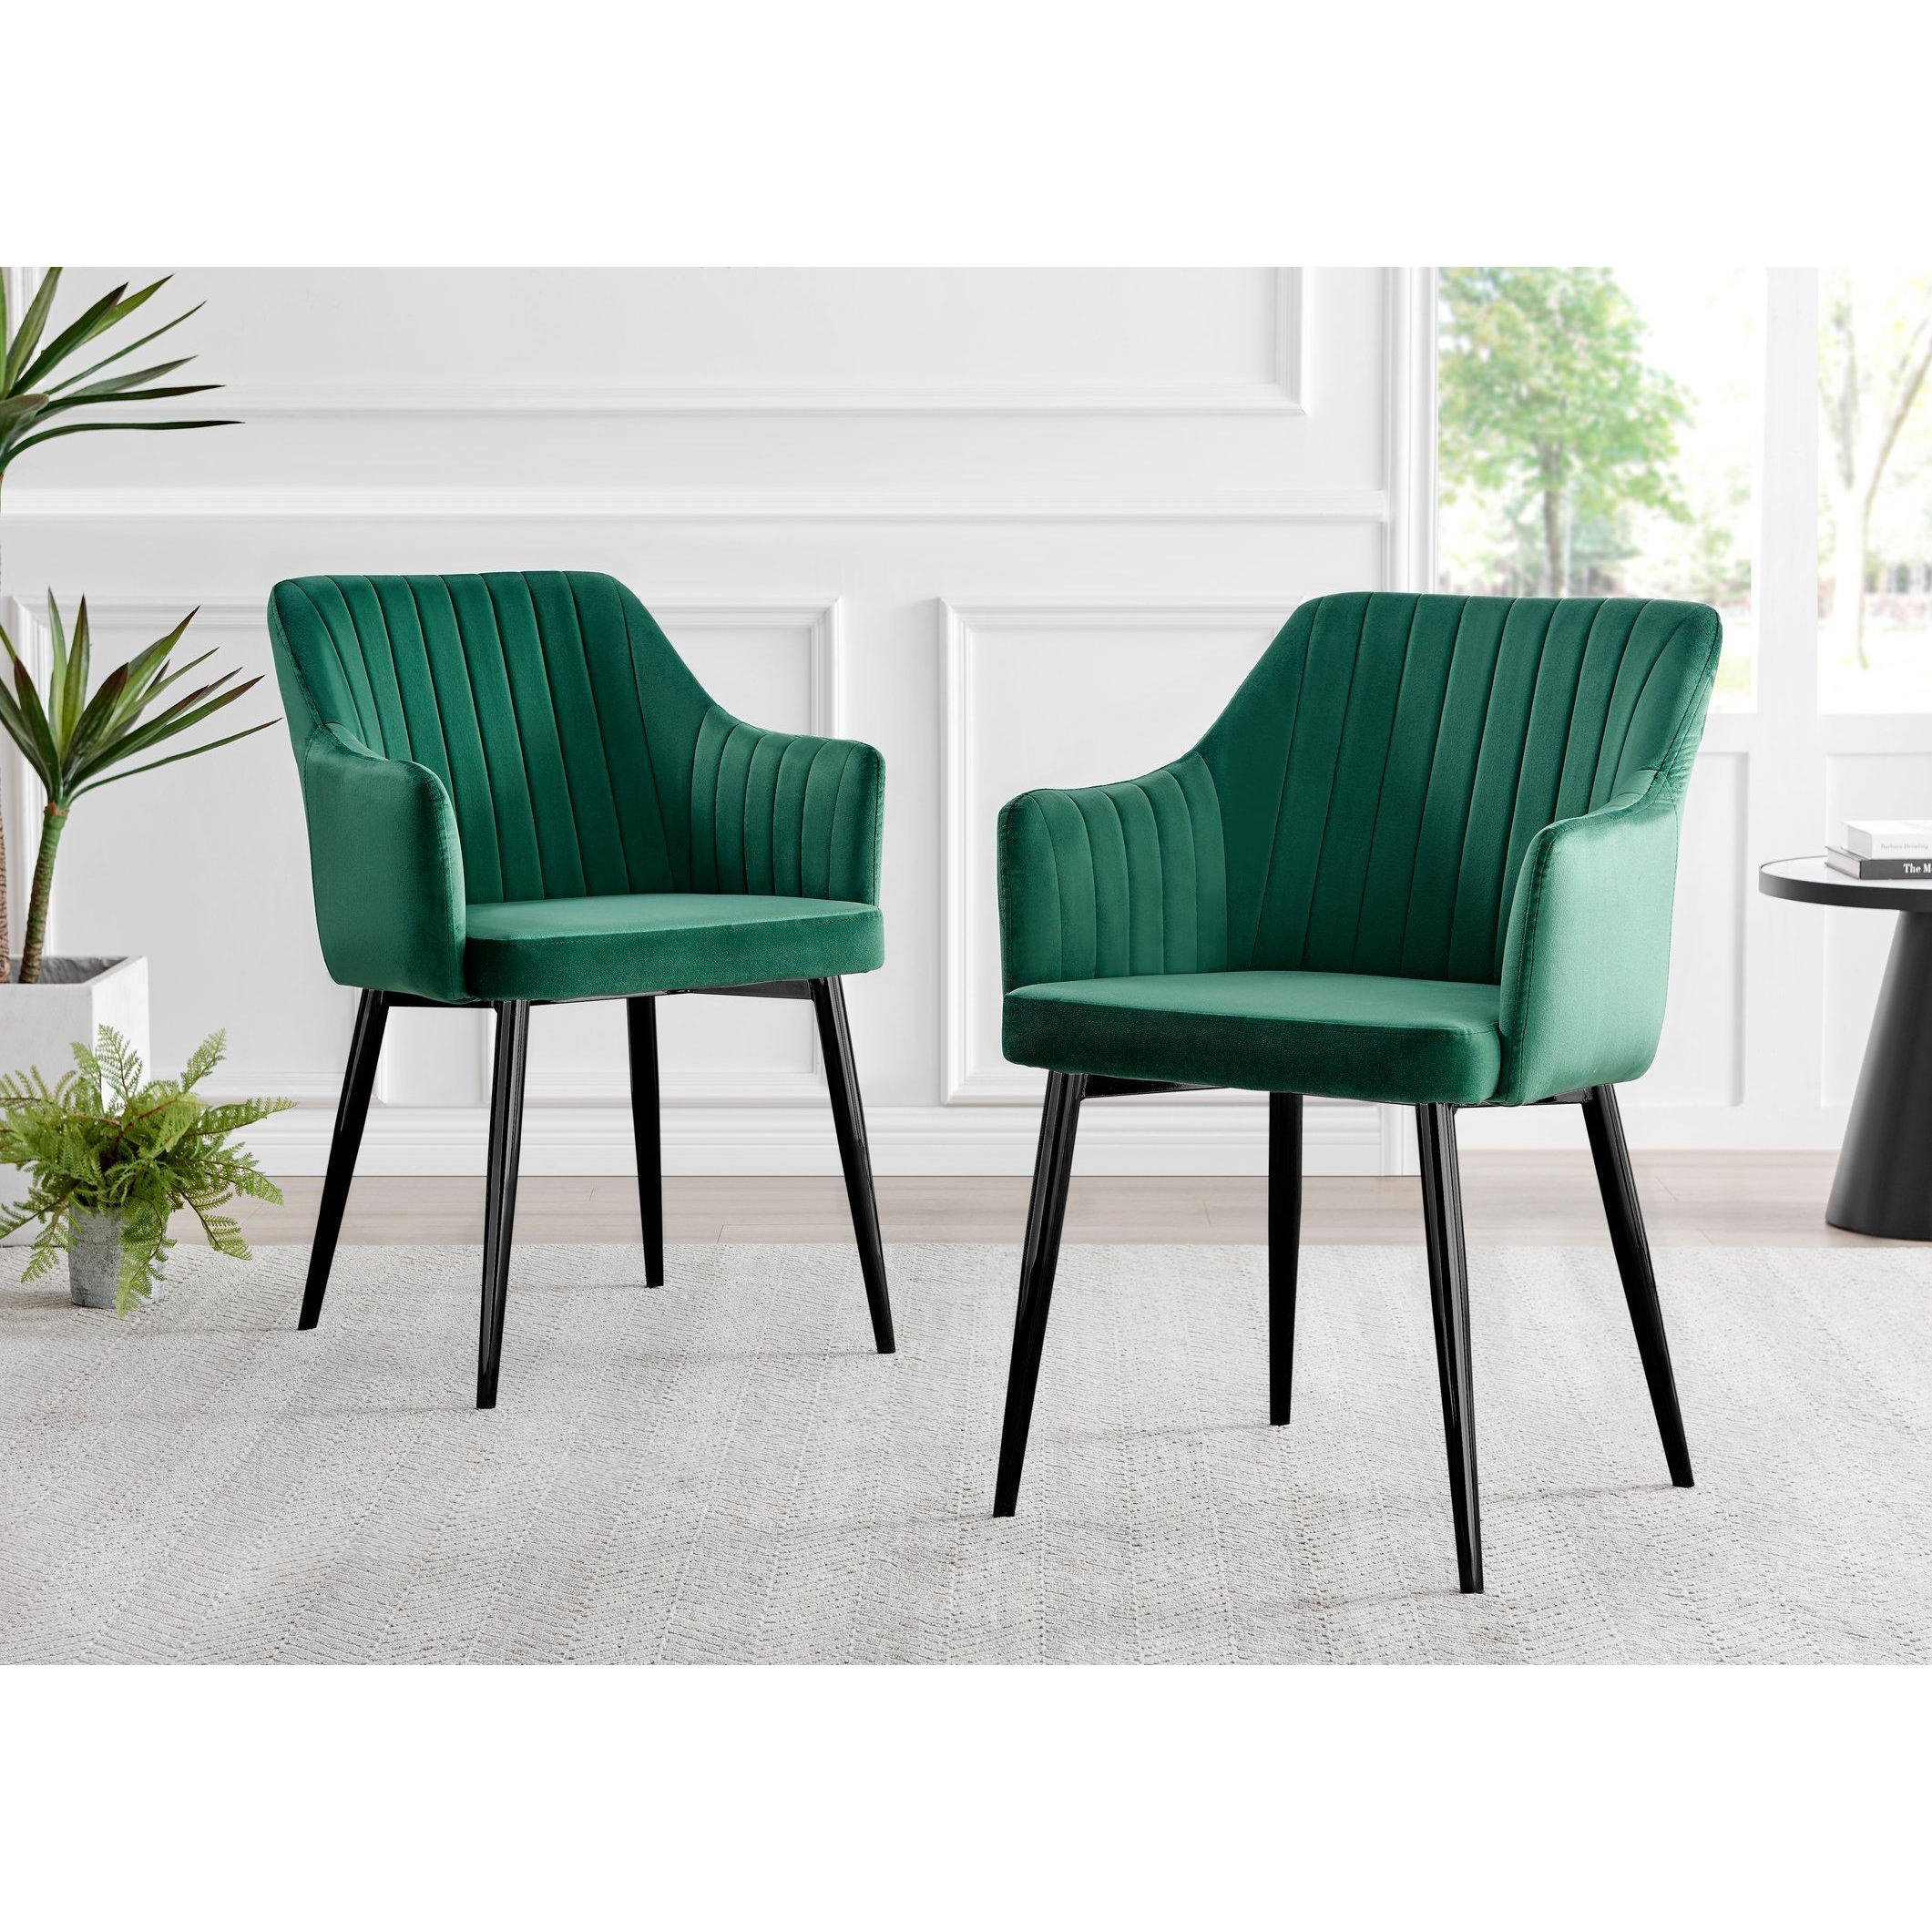 Set of 2 Calla Deep Padded Dining Chairs Upholstered in Soft Velvet With Black Metal Legs - image 1